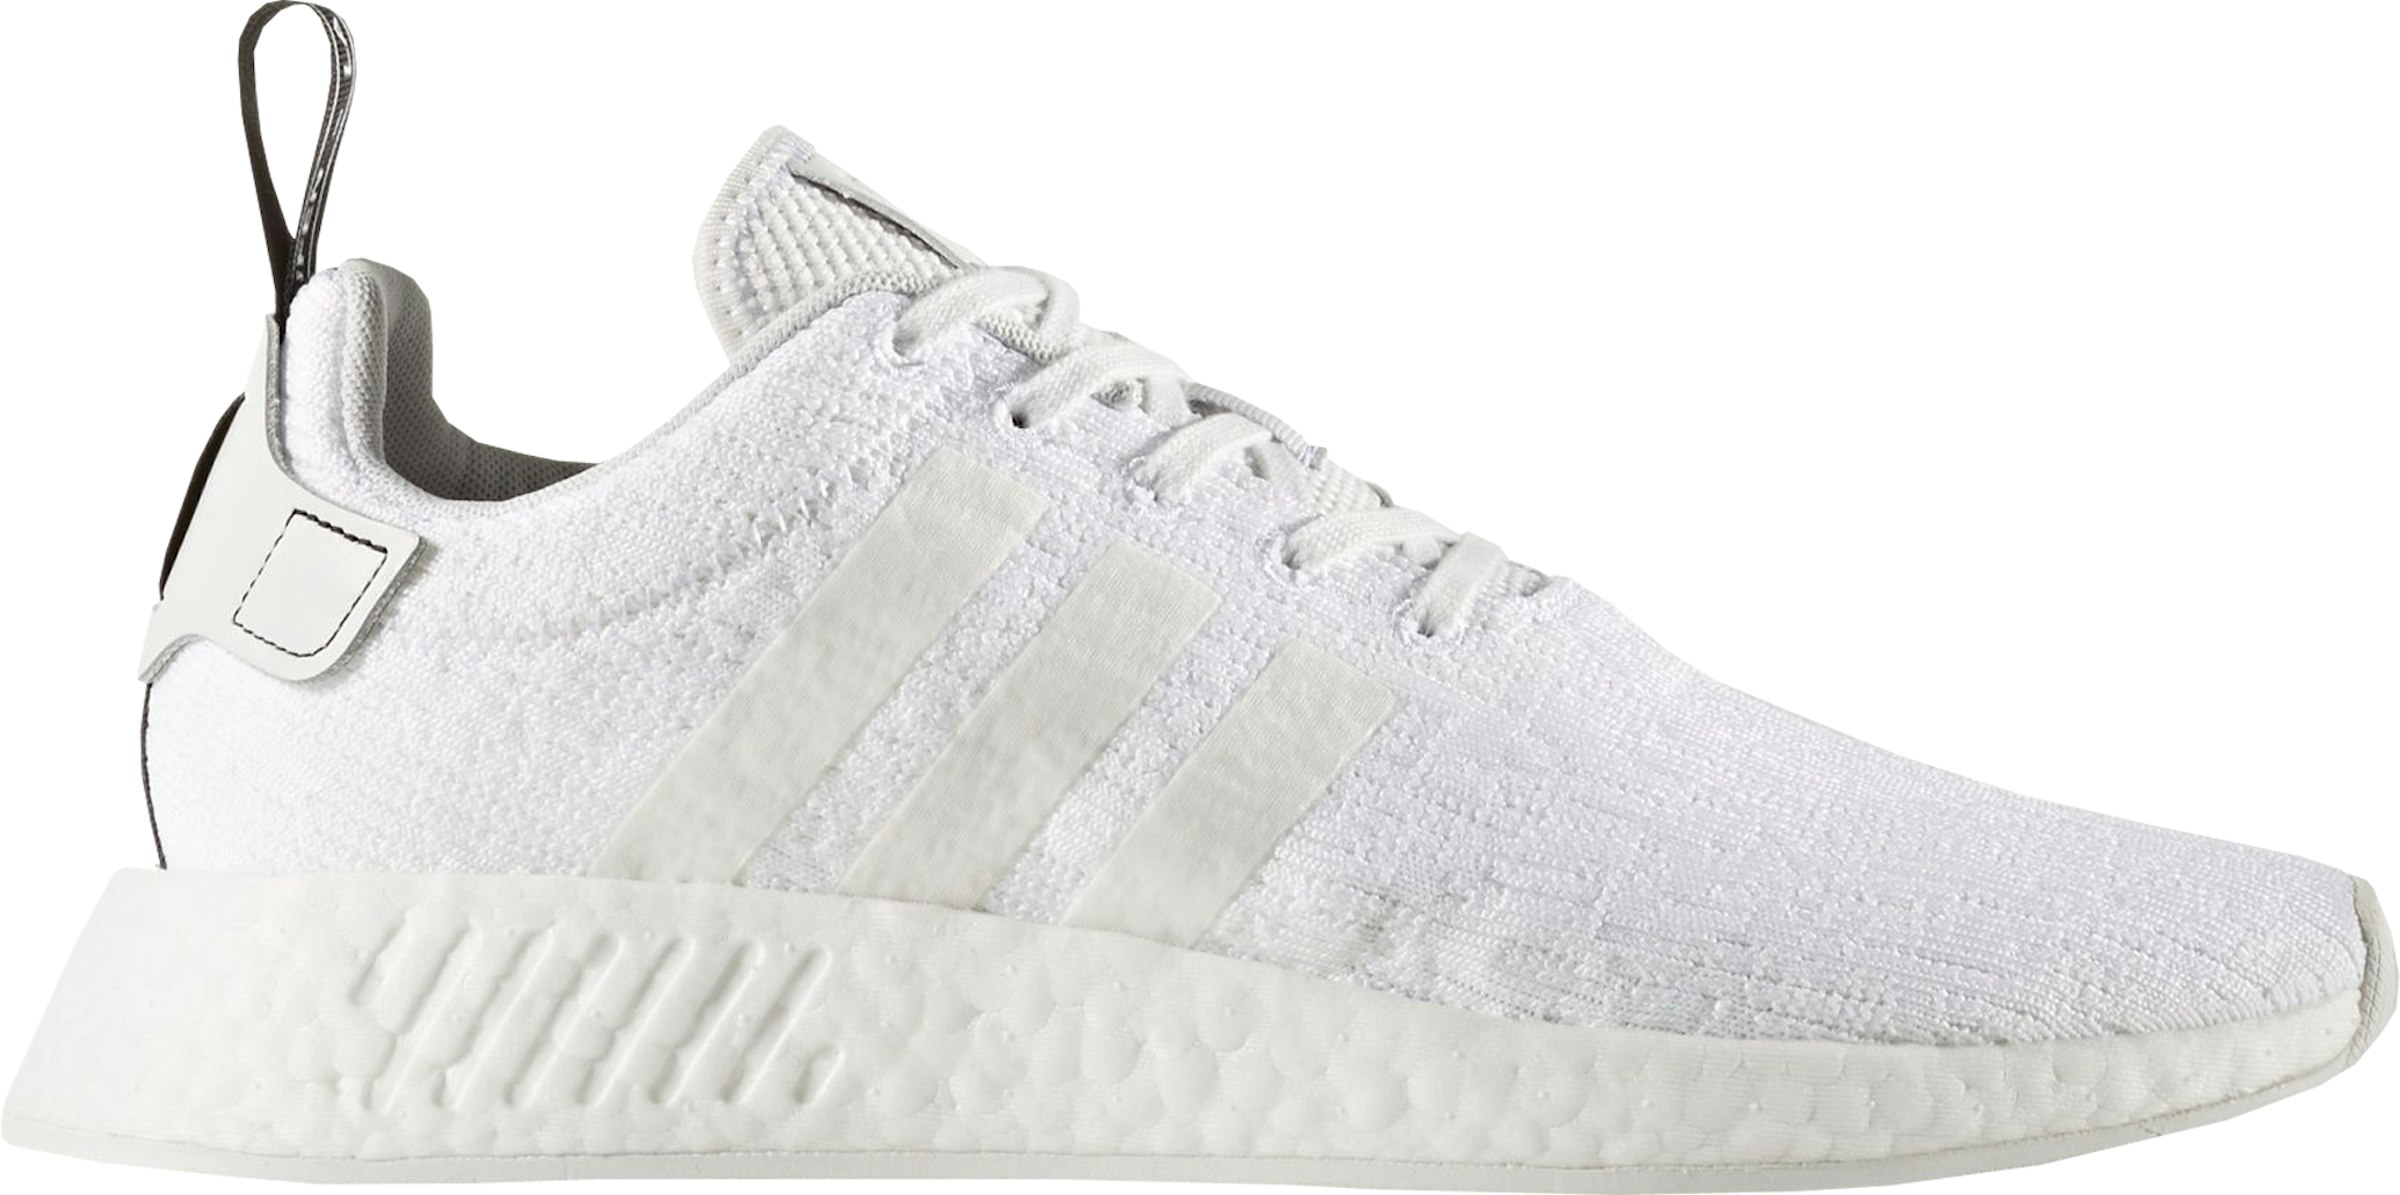 adidas Crystal White - BY9914 - US